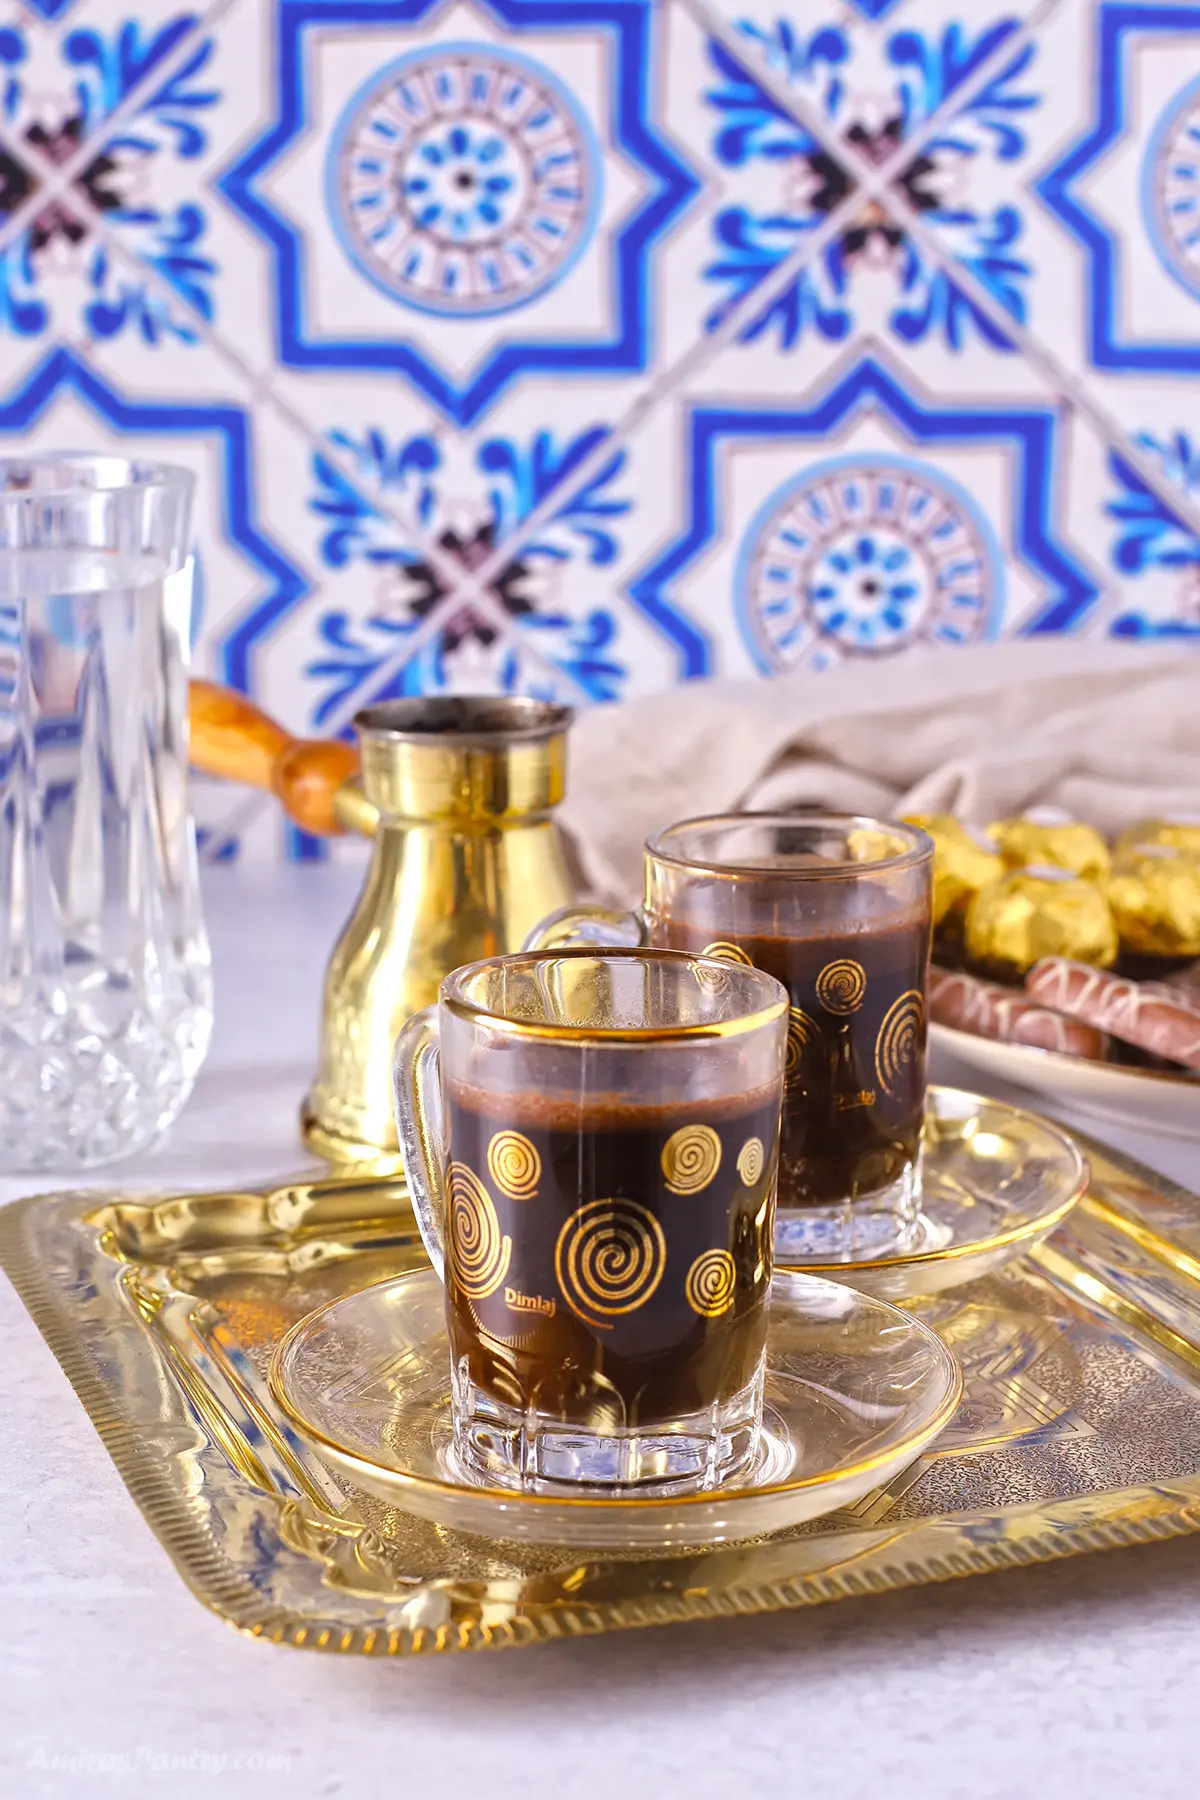 A tray with two Turkish coffee cups, a tall glass of water and some candy on the side.